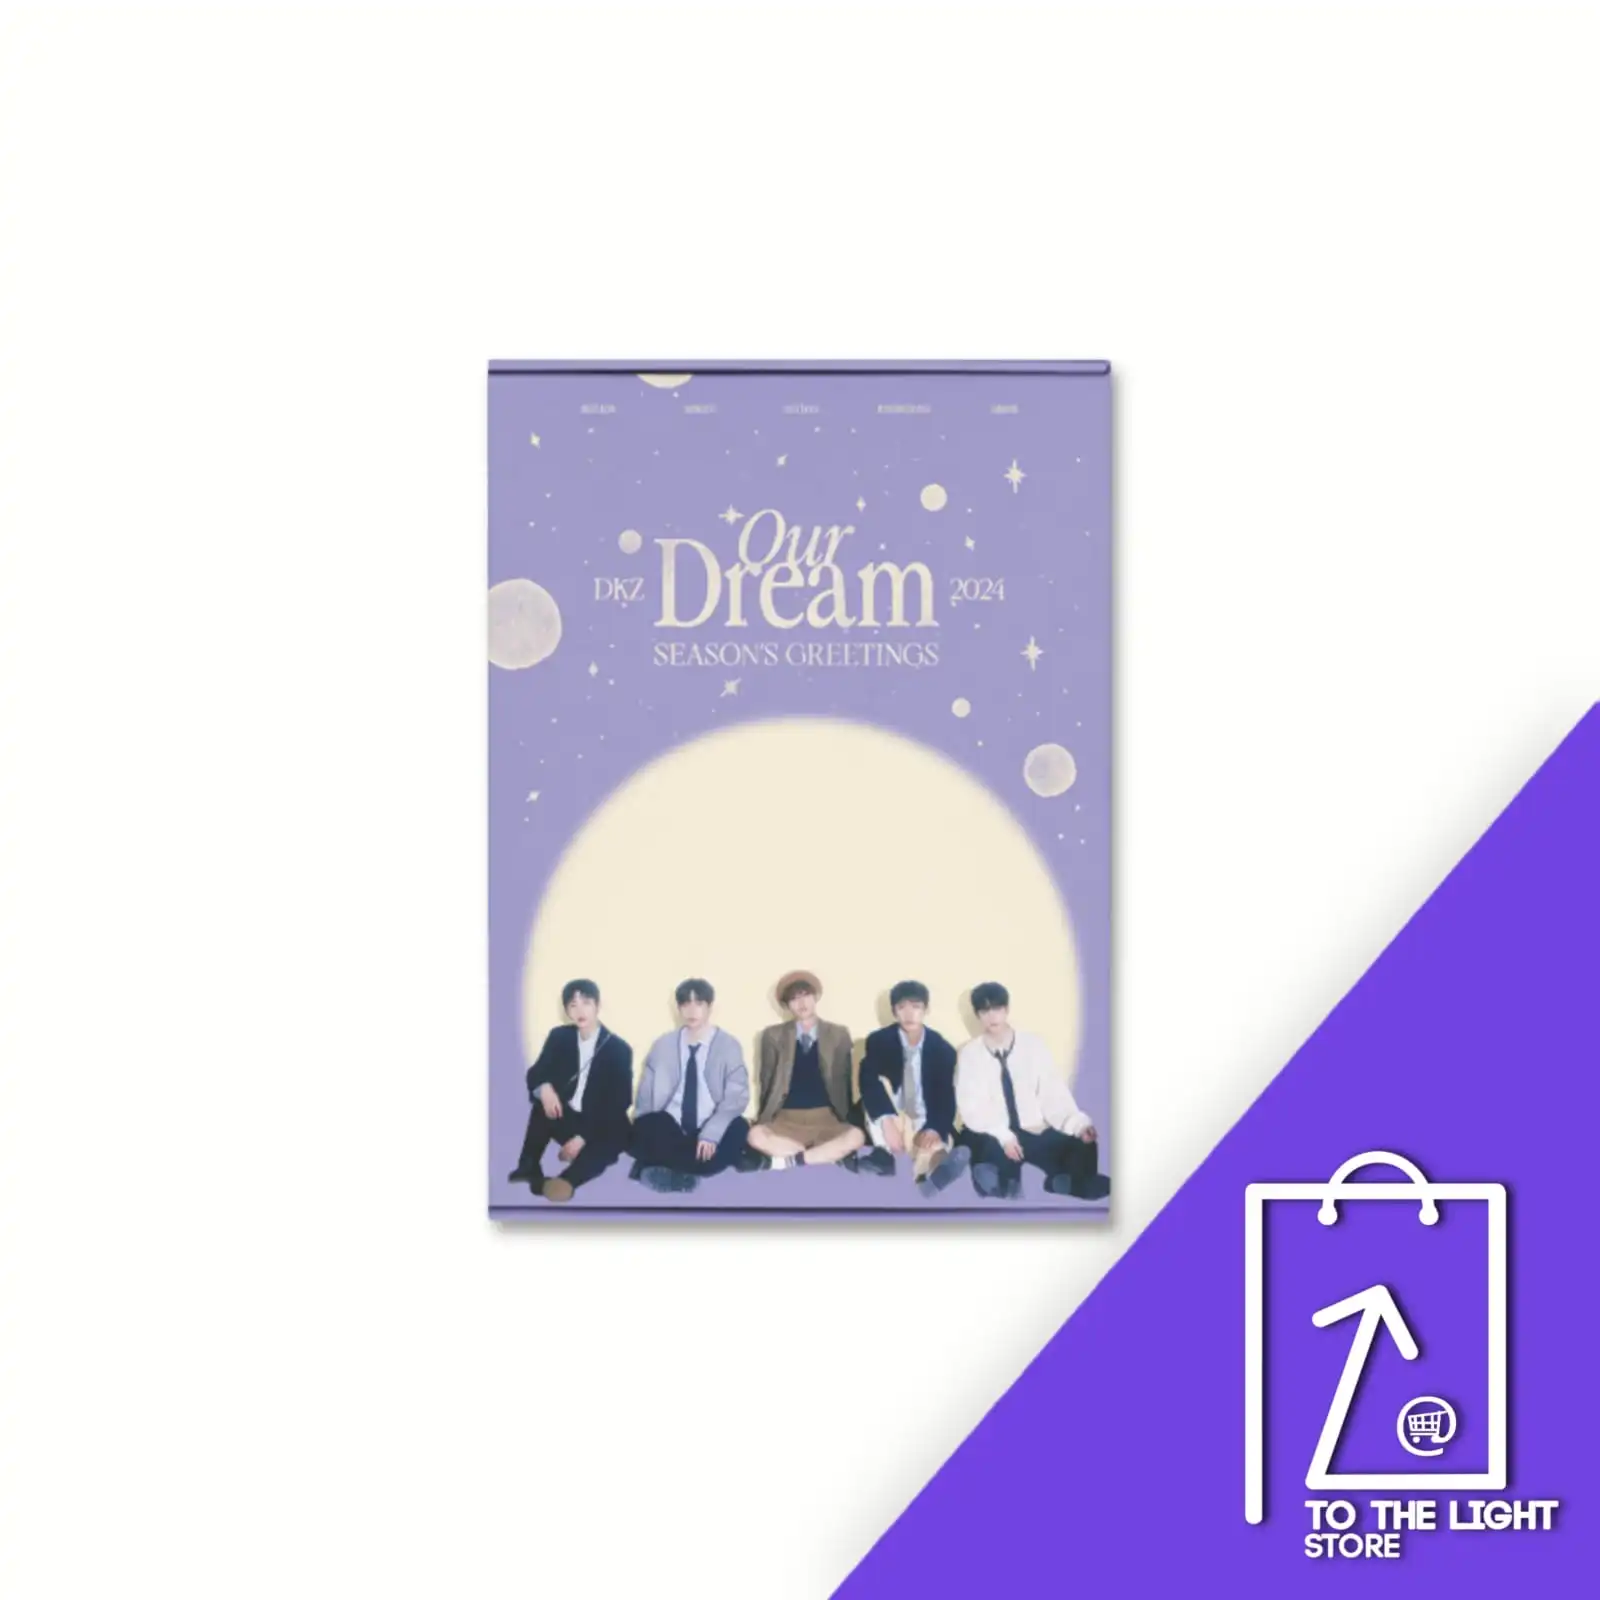 DKZ – 2024 SEASON’S GREETINGS [Our Dream] + (fromm Gift)